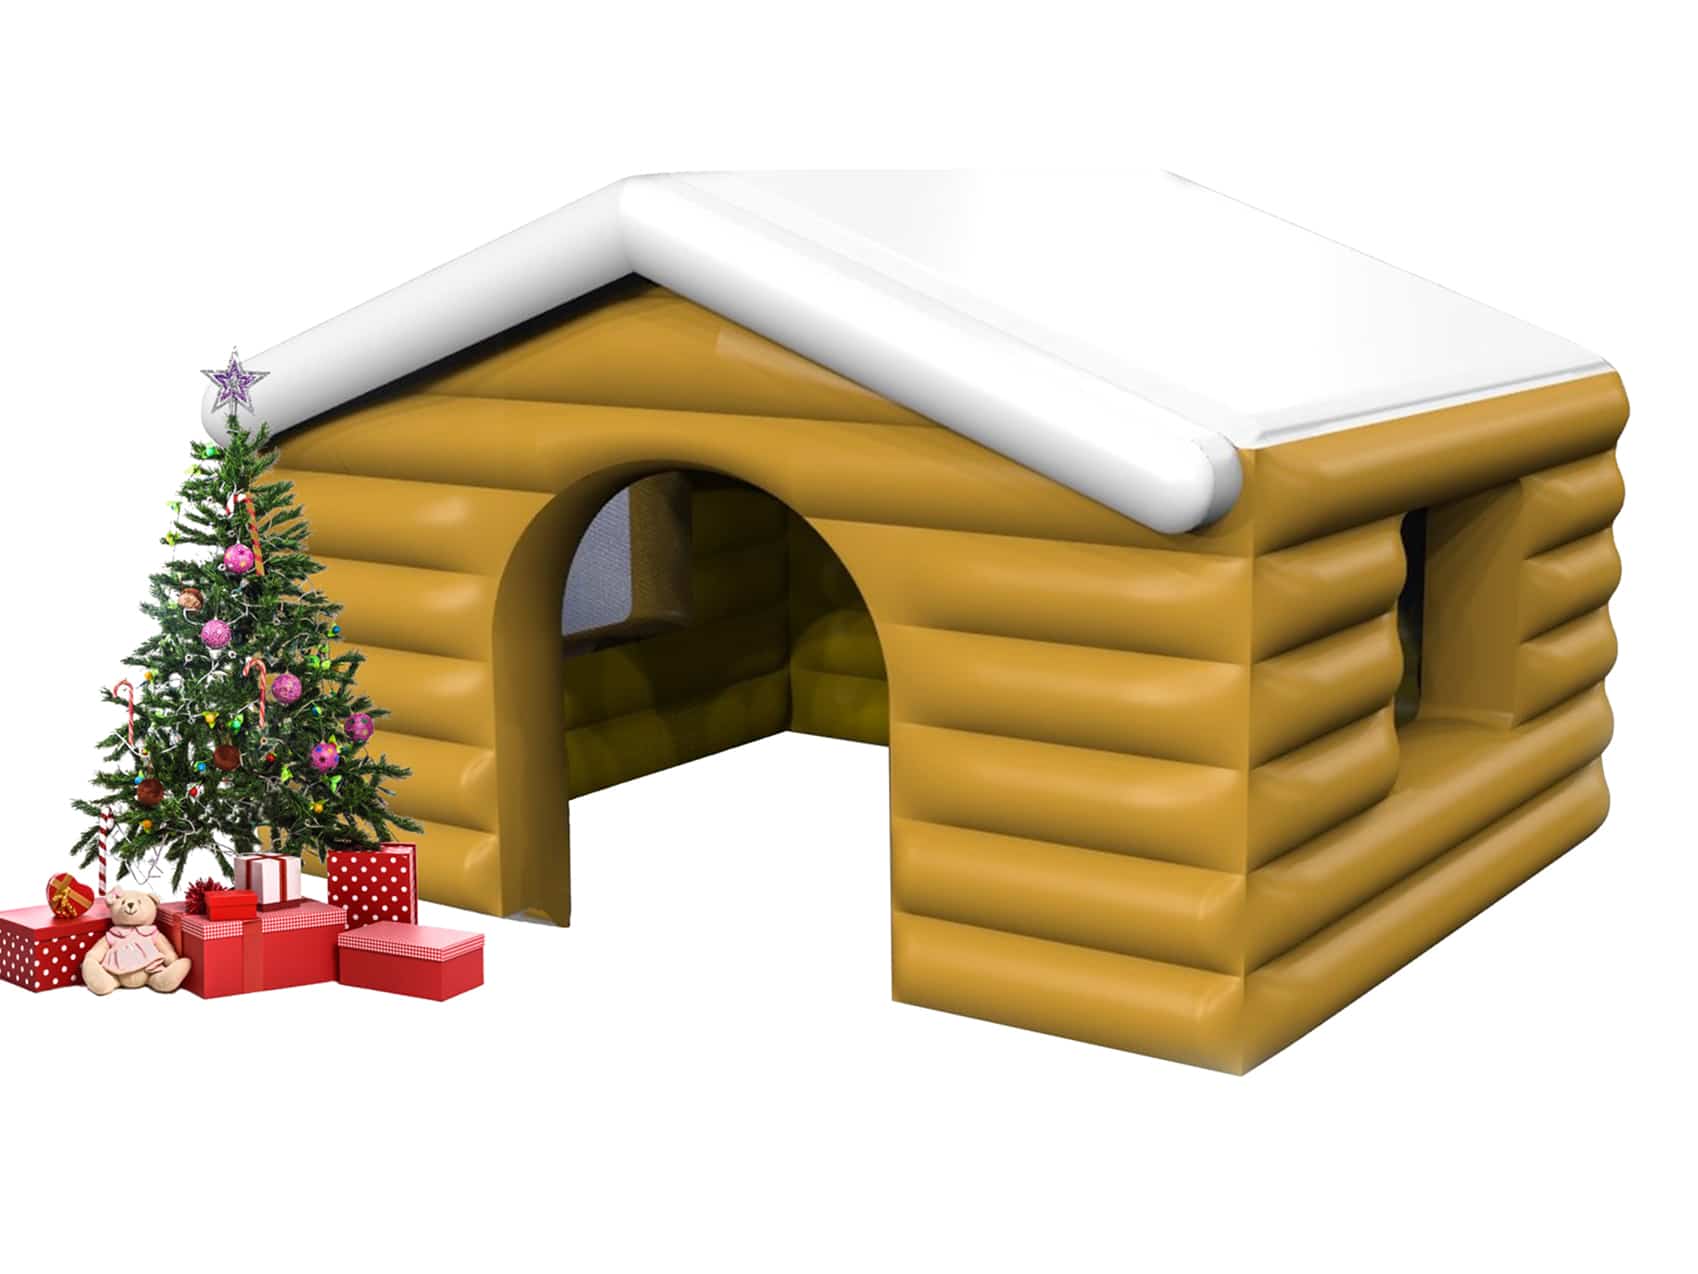 detour-maison-pere-noel-special-noel-gonflable-structures-animations